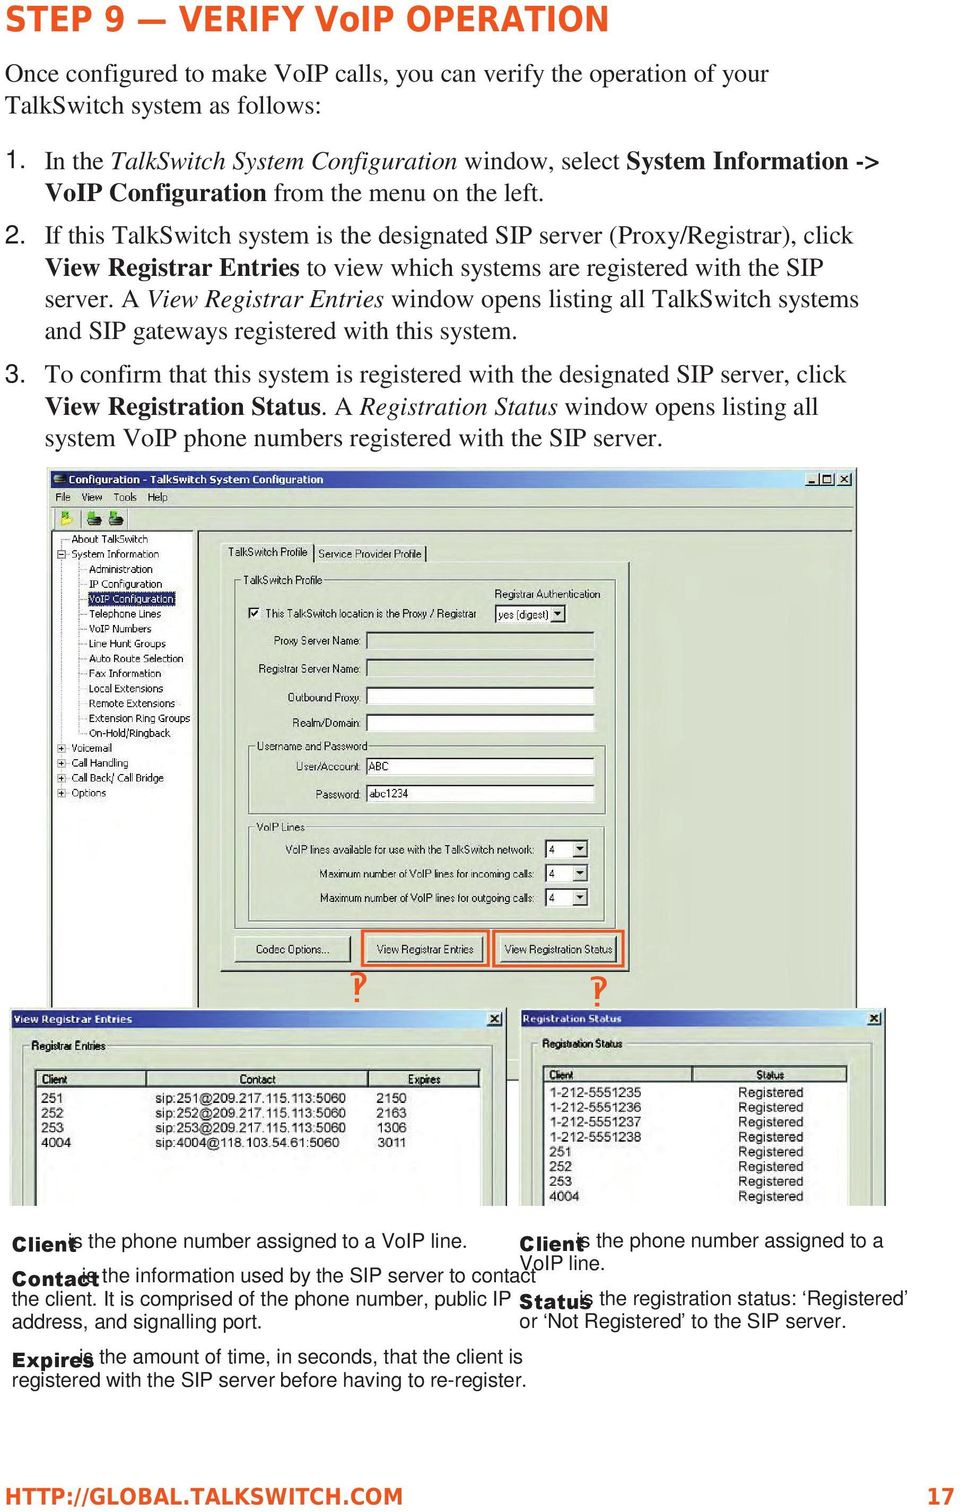 If this TalkSwitch system is the designated SIP server (Proxy/Registrar), click View Registrar Entries to view which systems are registered with the SIP server.